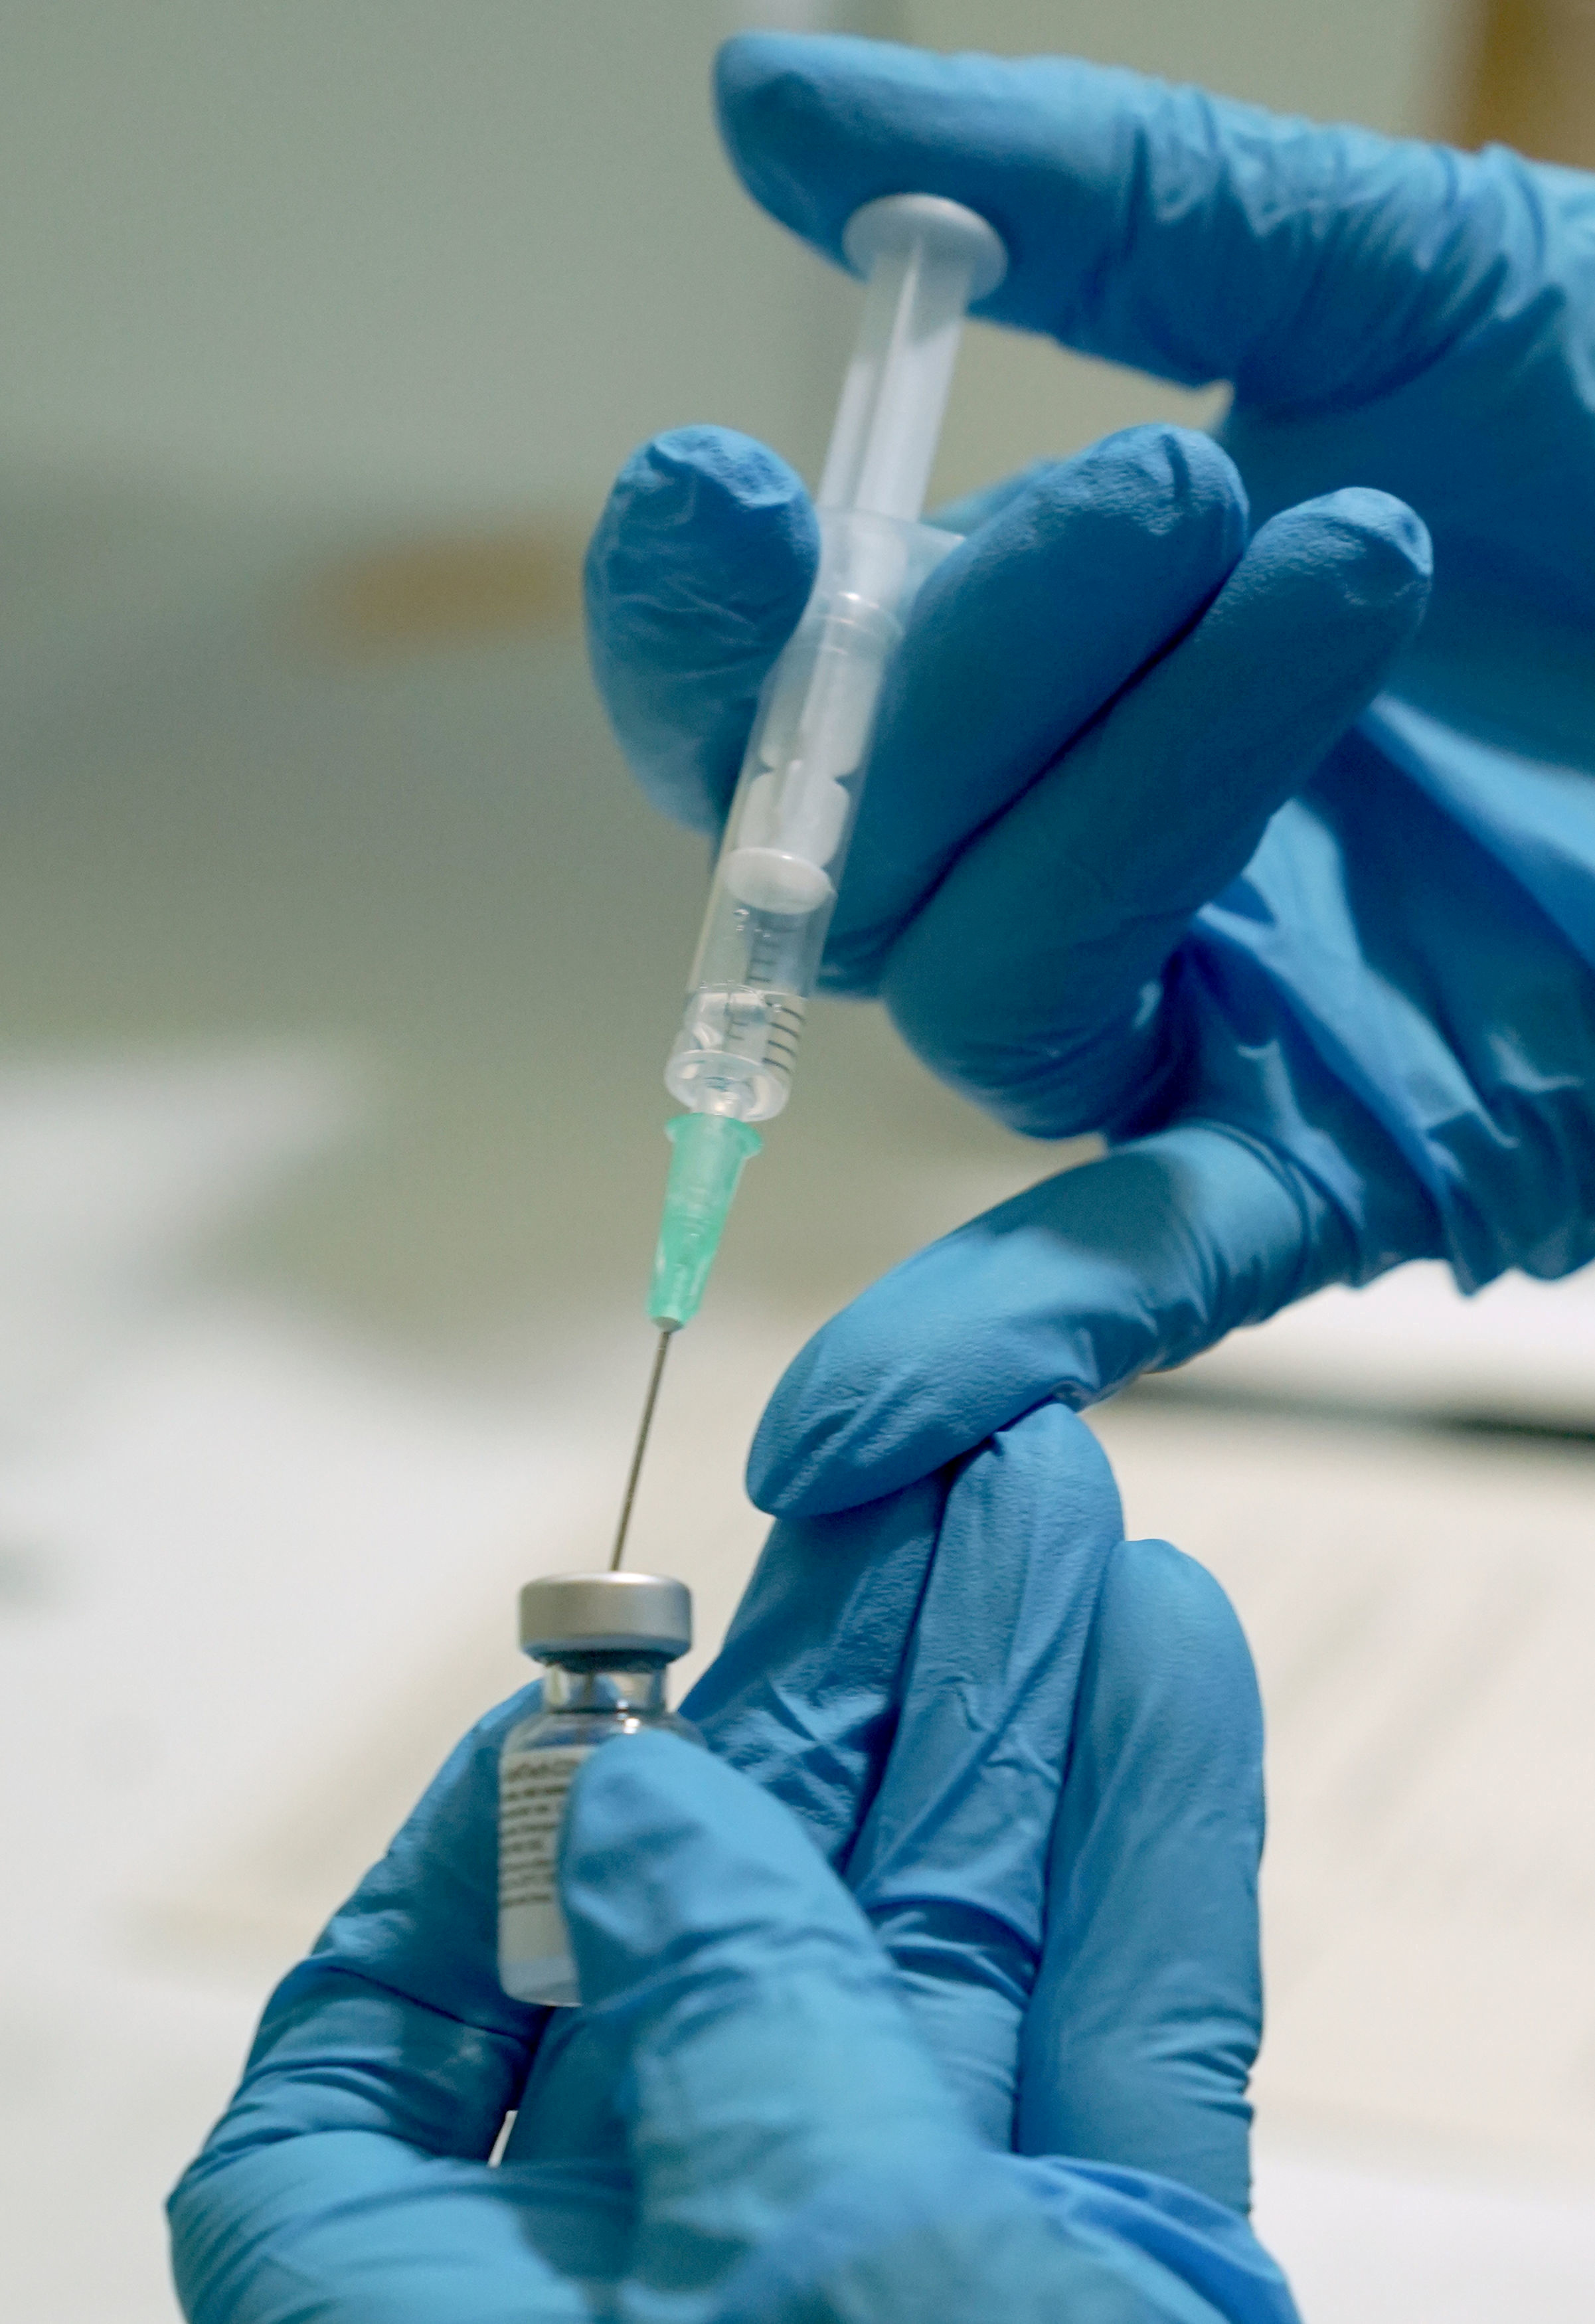 Analysis “Russian roulette” in Europe as needle shortages hamper ...